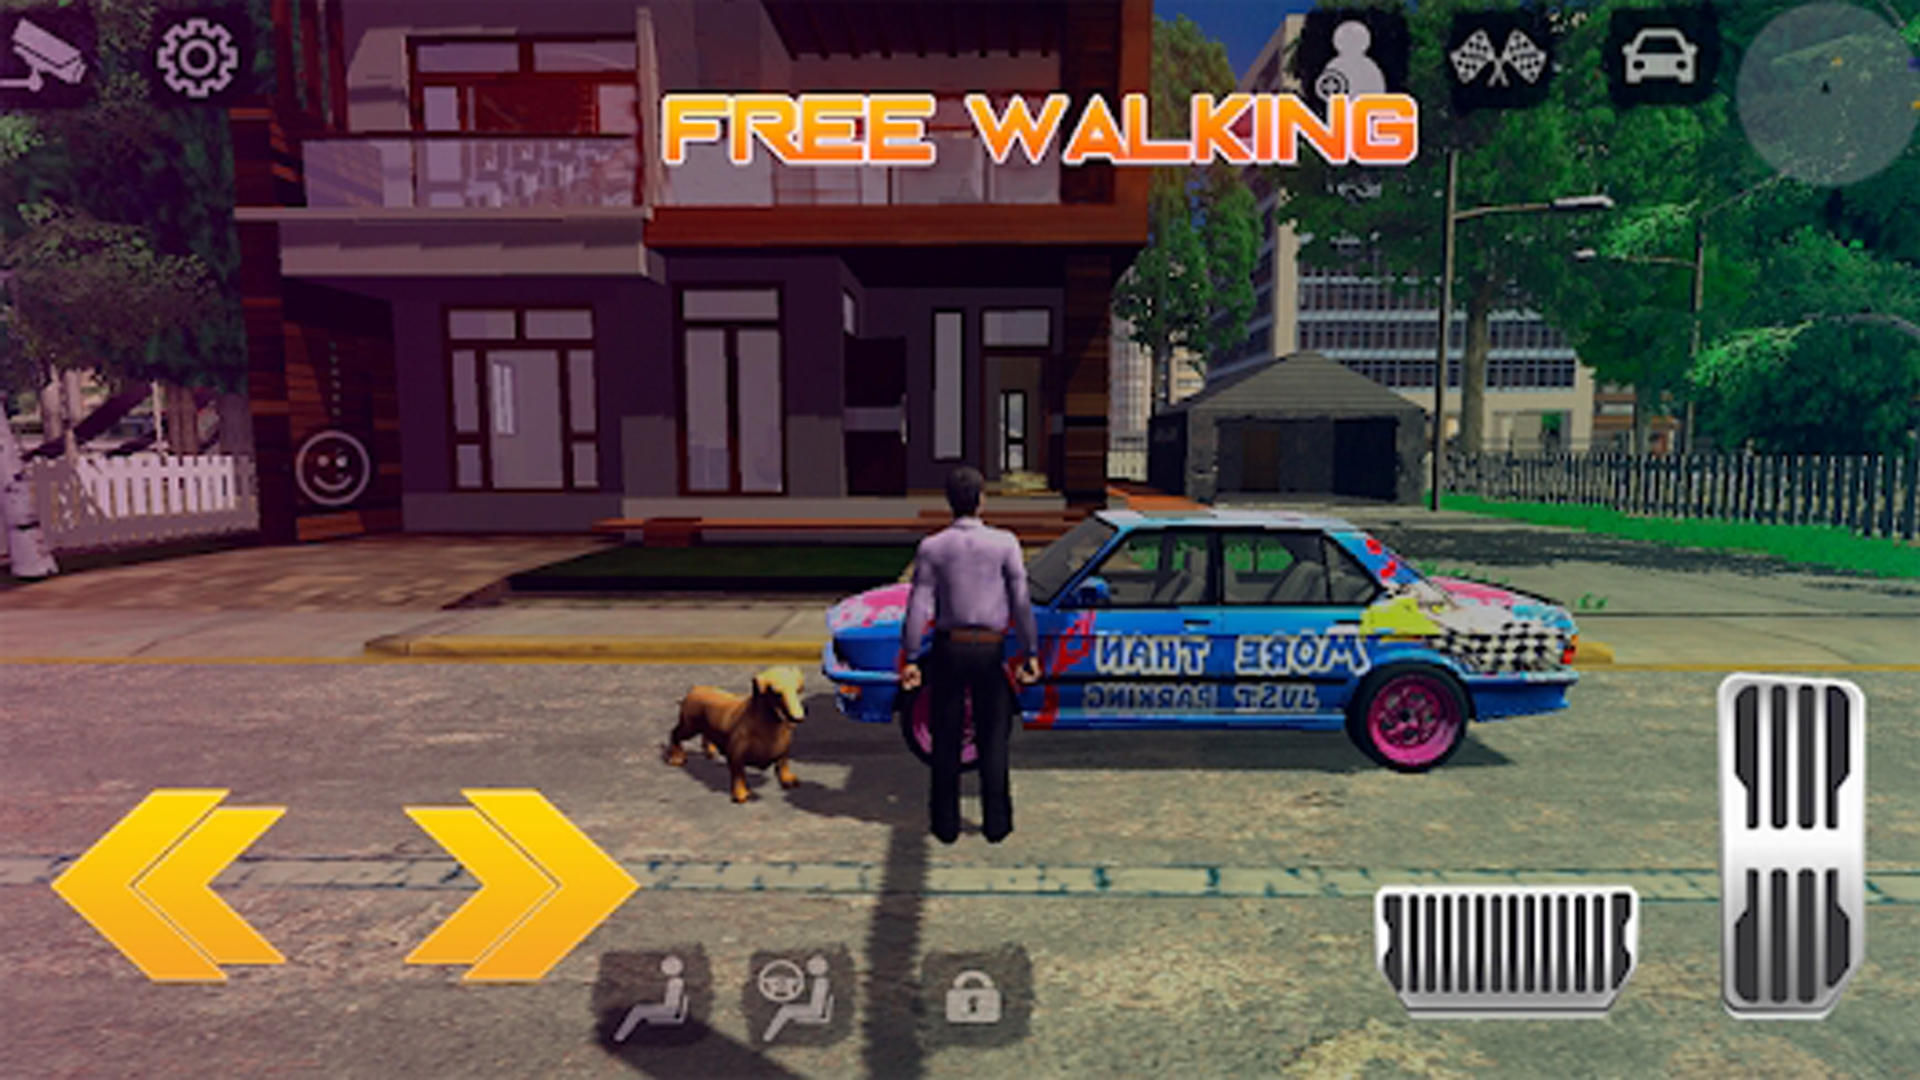 Download Car Parking Multiplayer APK for Android, Play on PC and